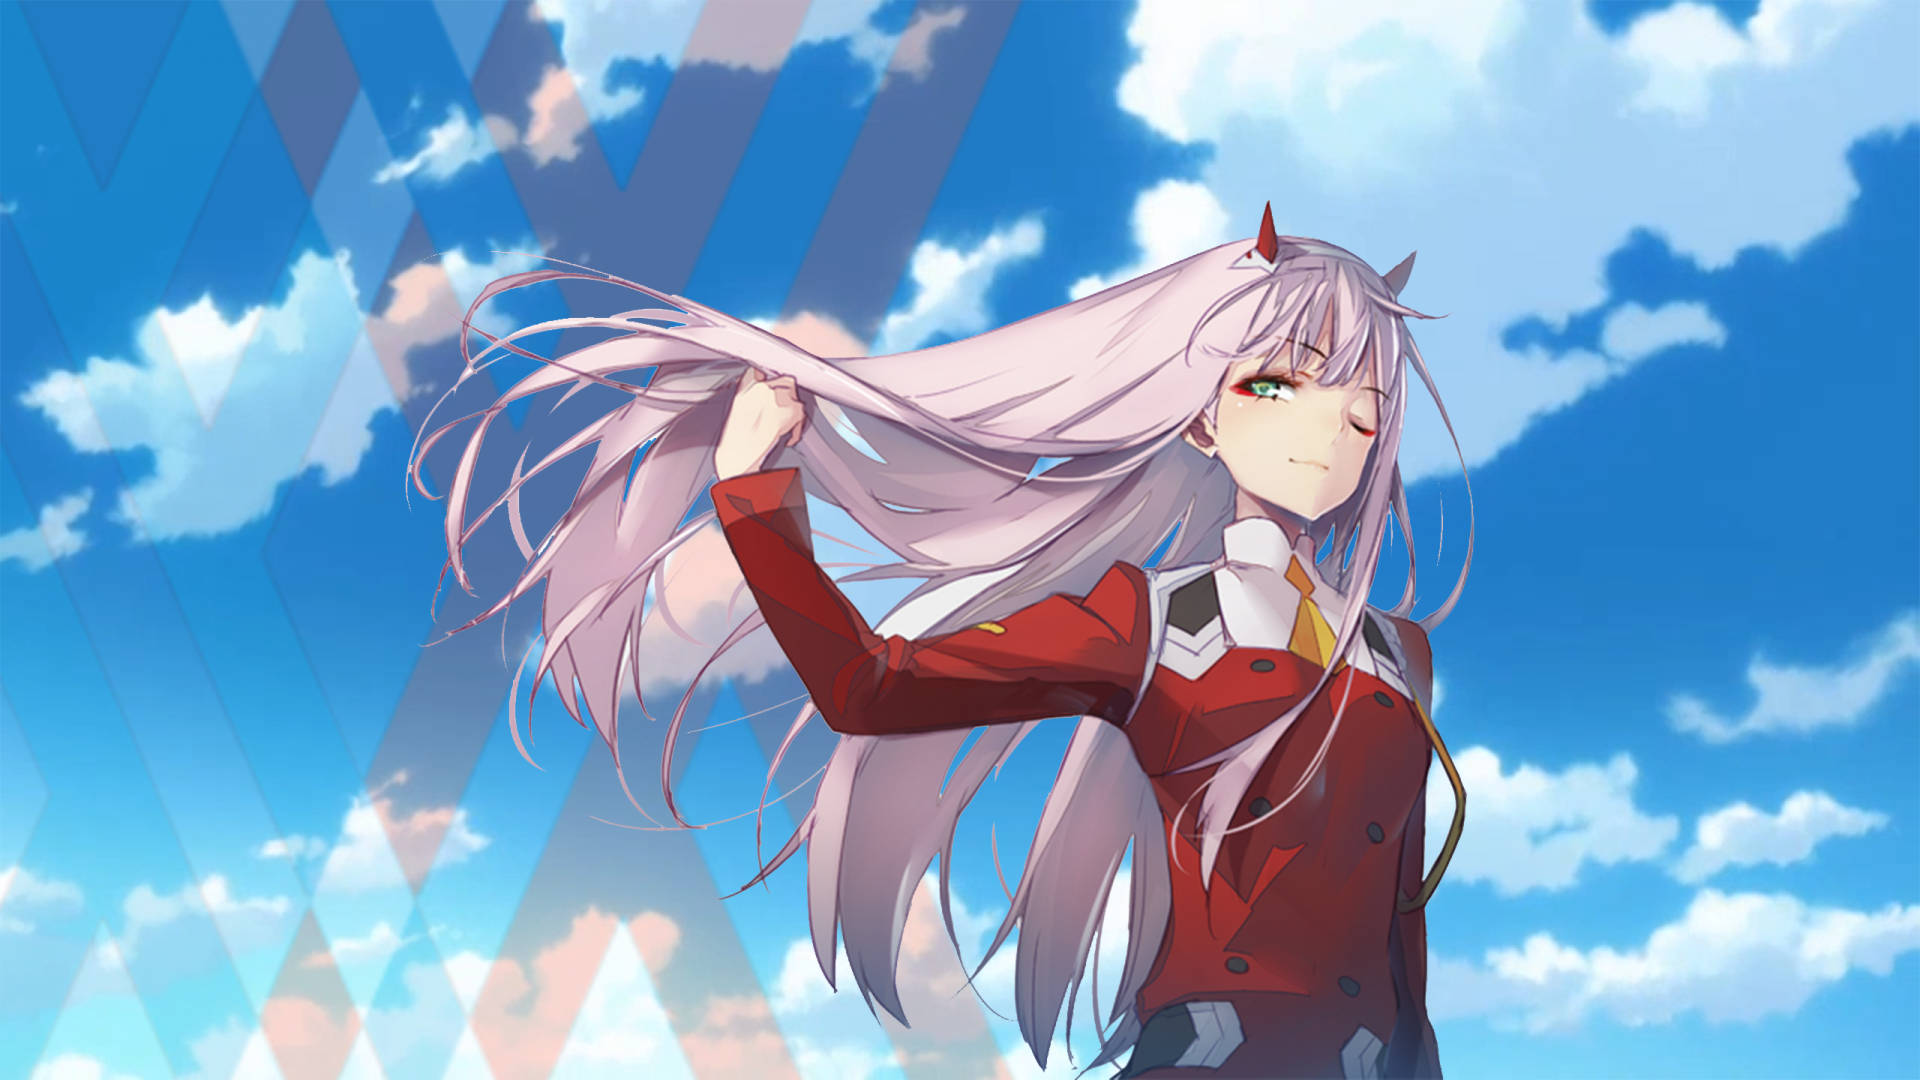 Two kids find a peaceful moment as they fly through the blue sky in Darling In The Franxx. Wallpaper